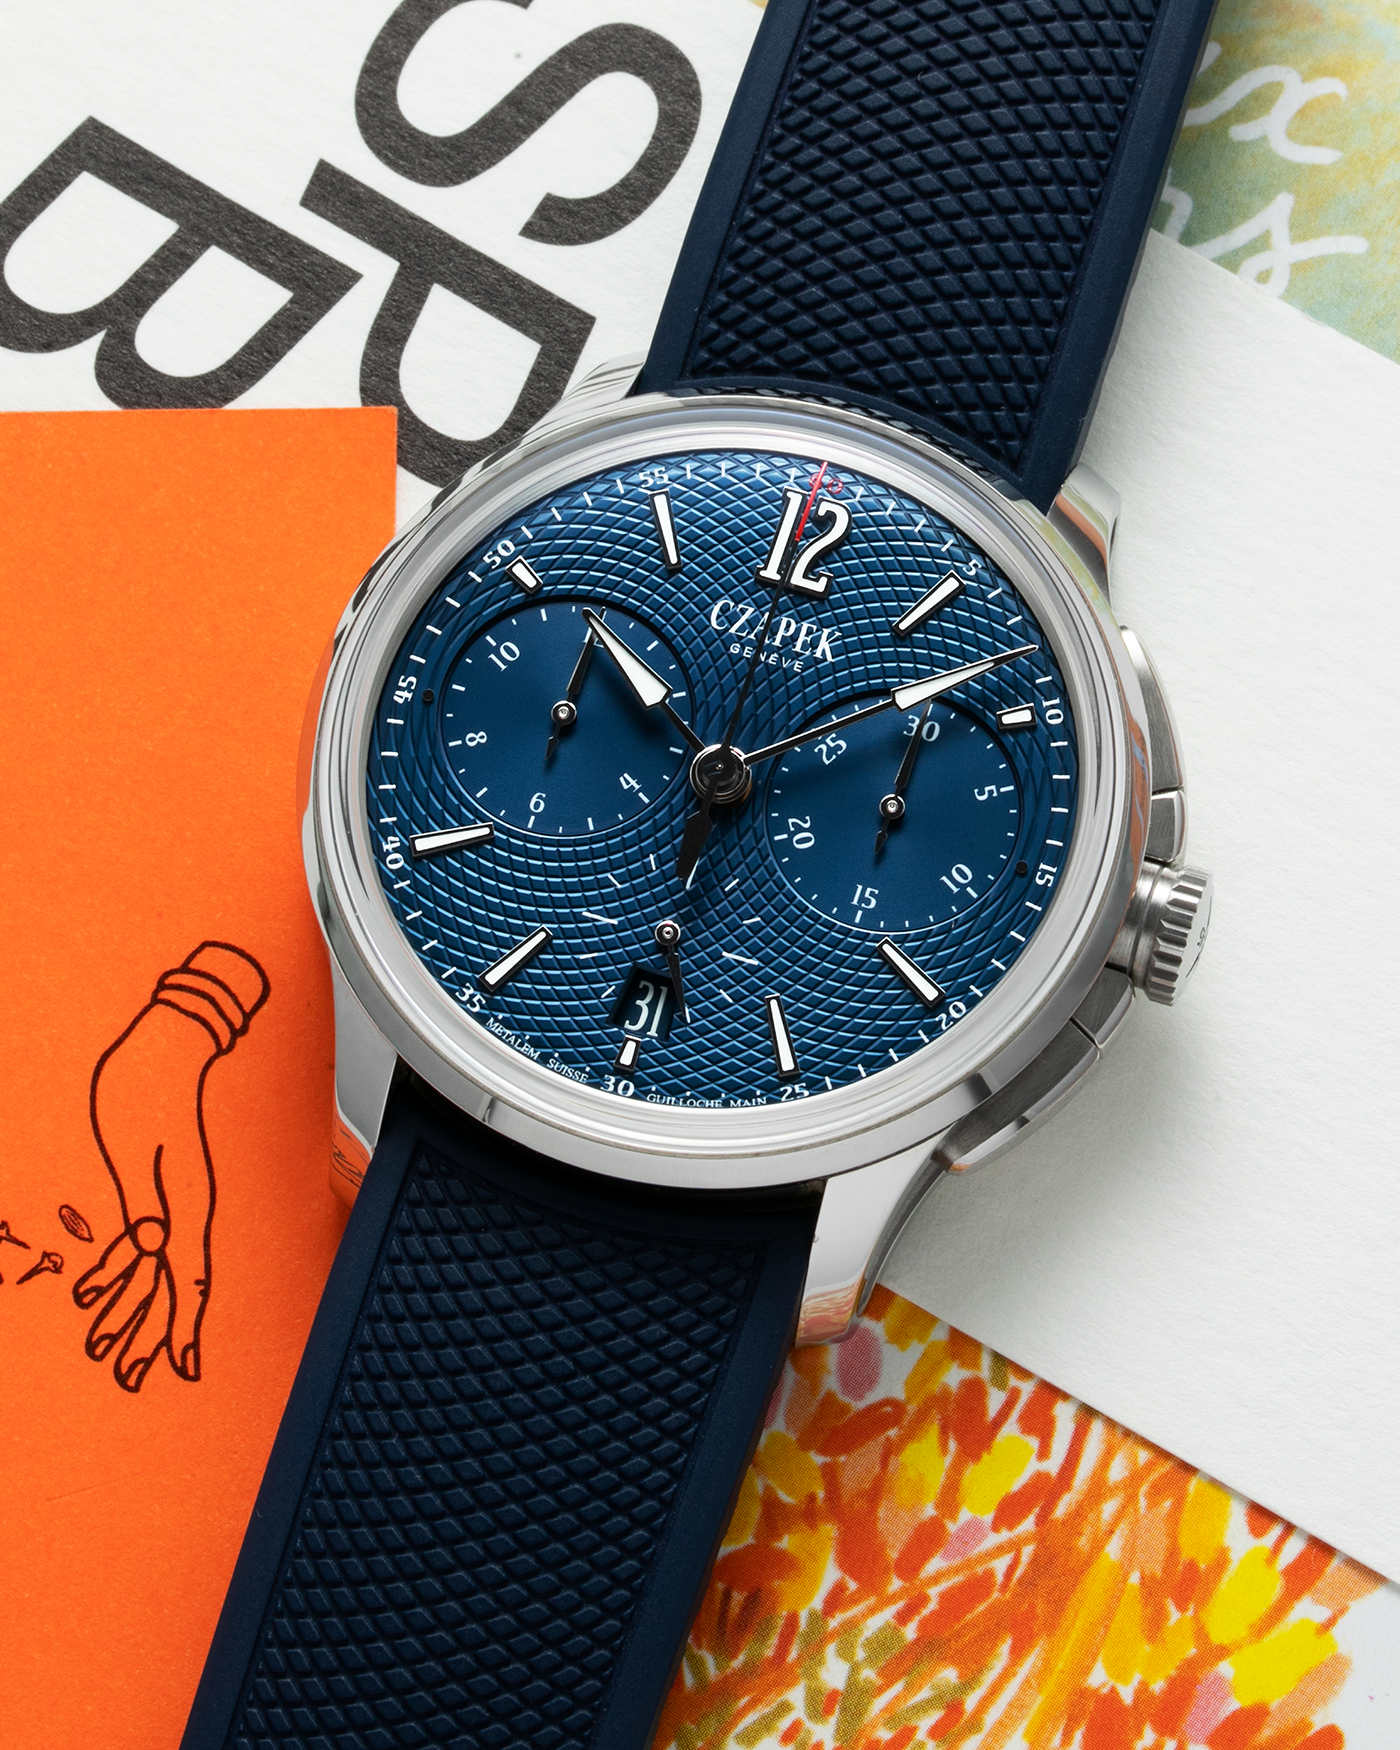 Brand: Czepek  Year: 2018 Model: Faubourg de Cracovie Chronograph L’Heuere Bleu Material: Stainless Steel Movement: Cal. SXH3 Case Diameter: 41.5mm Strap: Czapek Blue Textured Rubber Strap and Stainless Steel Deployant